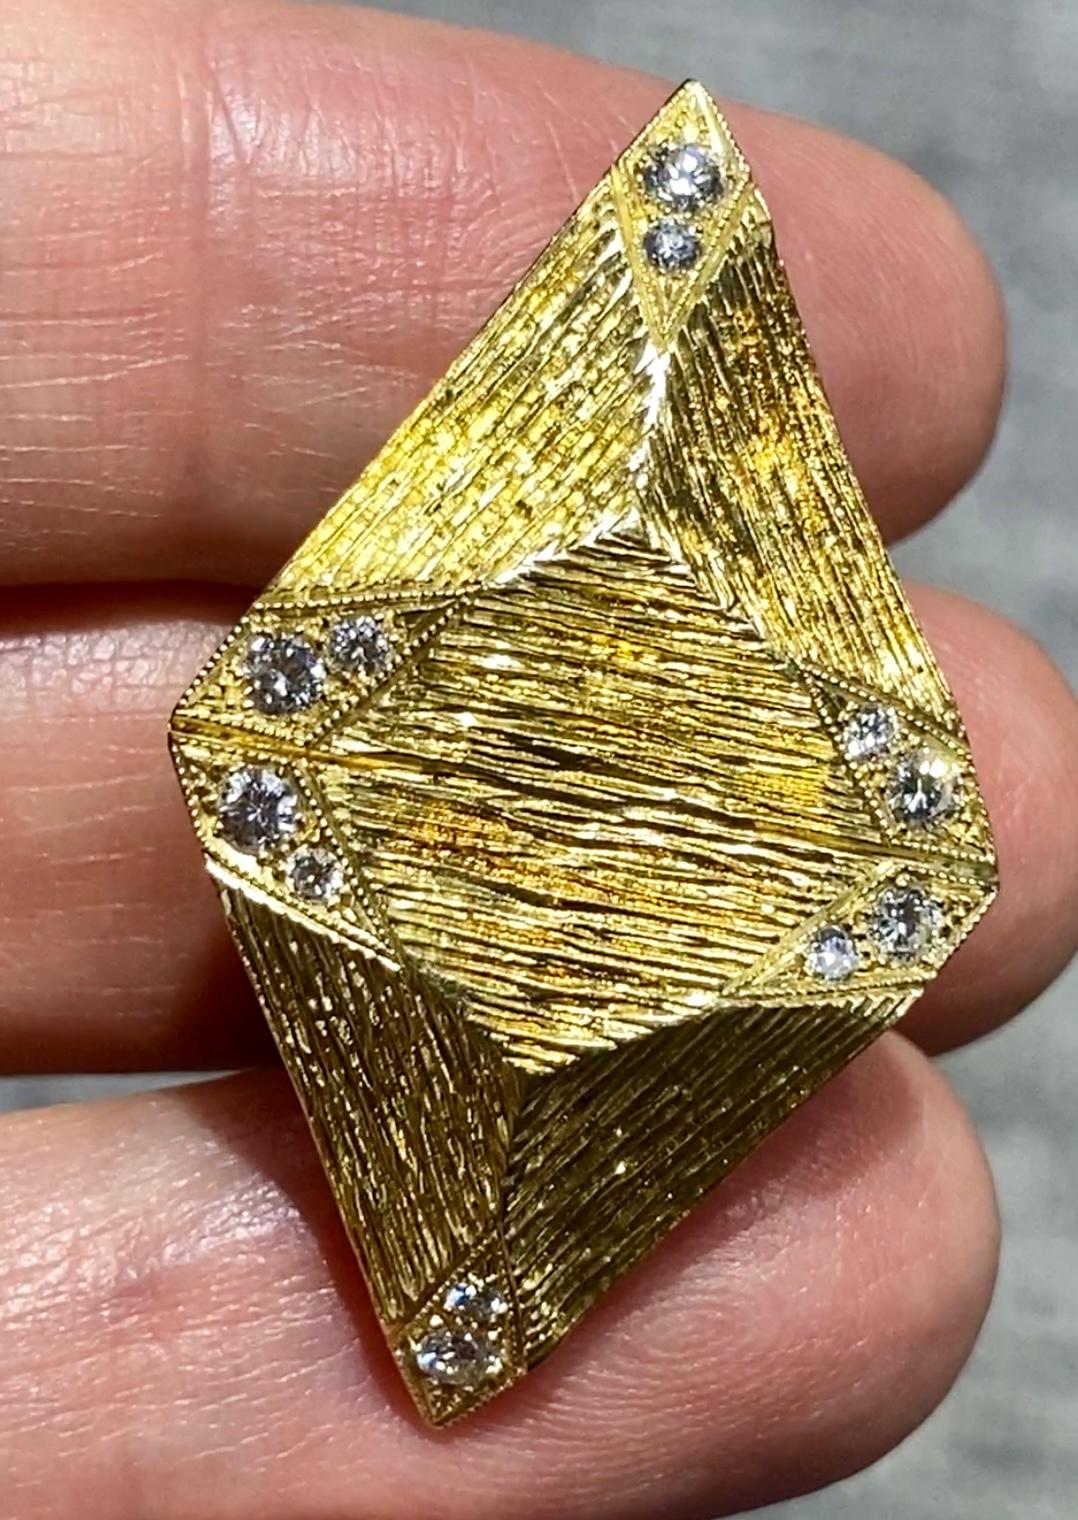 These striking 1970s 18k gold earrings are hand made and hand engraved. The corners of each triangular piece is adorned with small diamonds which accentuate the overall sparkle of the earrings. 

The earrings are a part of a set with a bracelet and